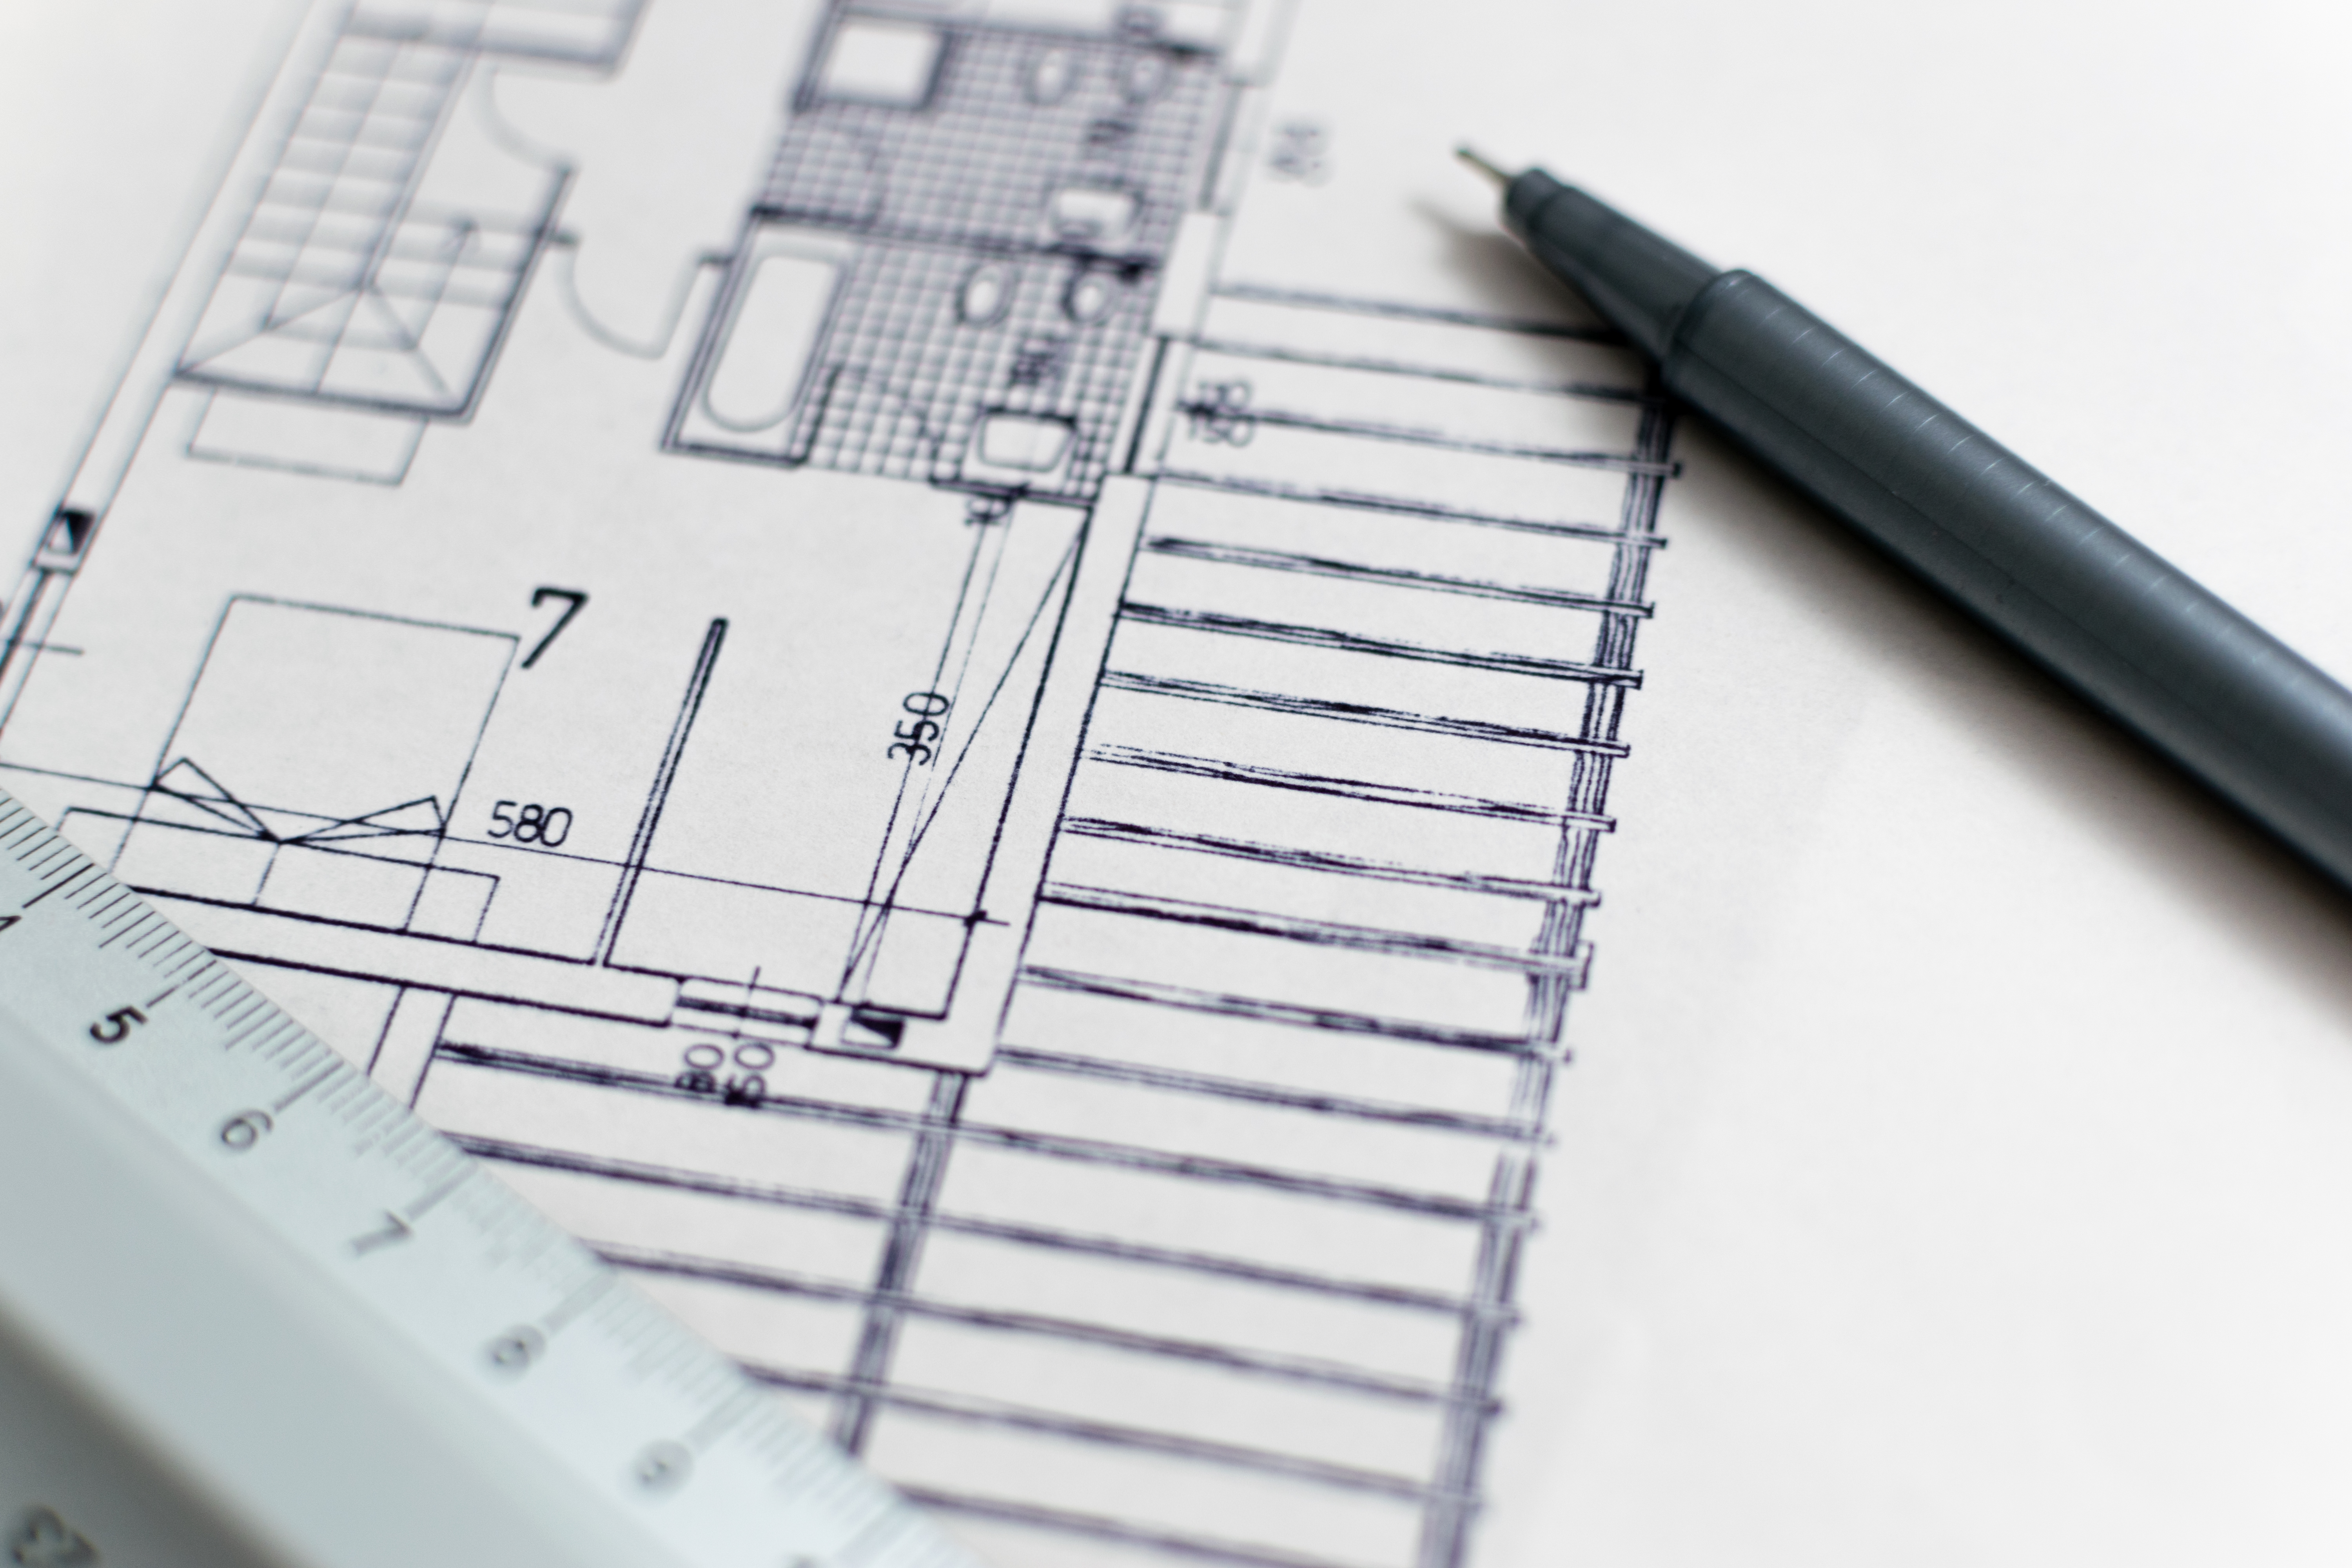 Architecture Blueprint With Pen And Ruler